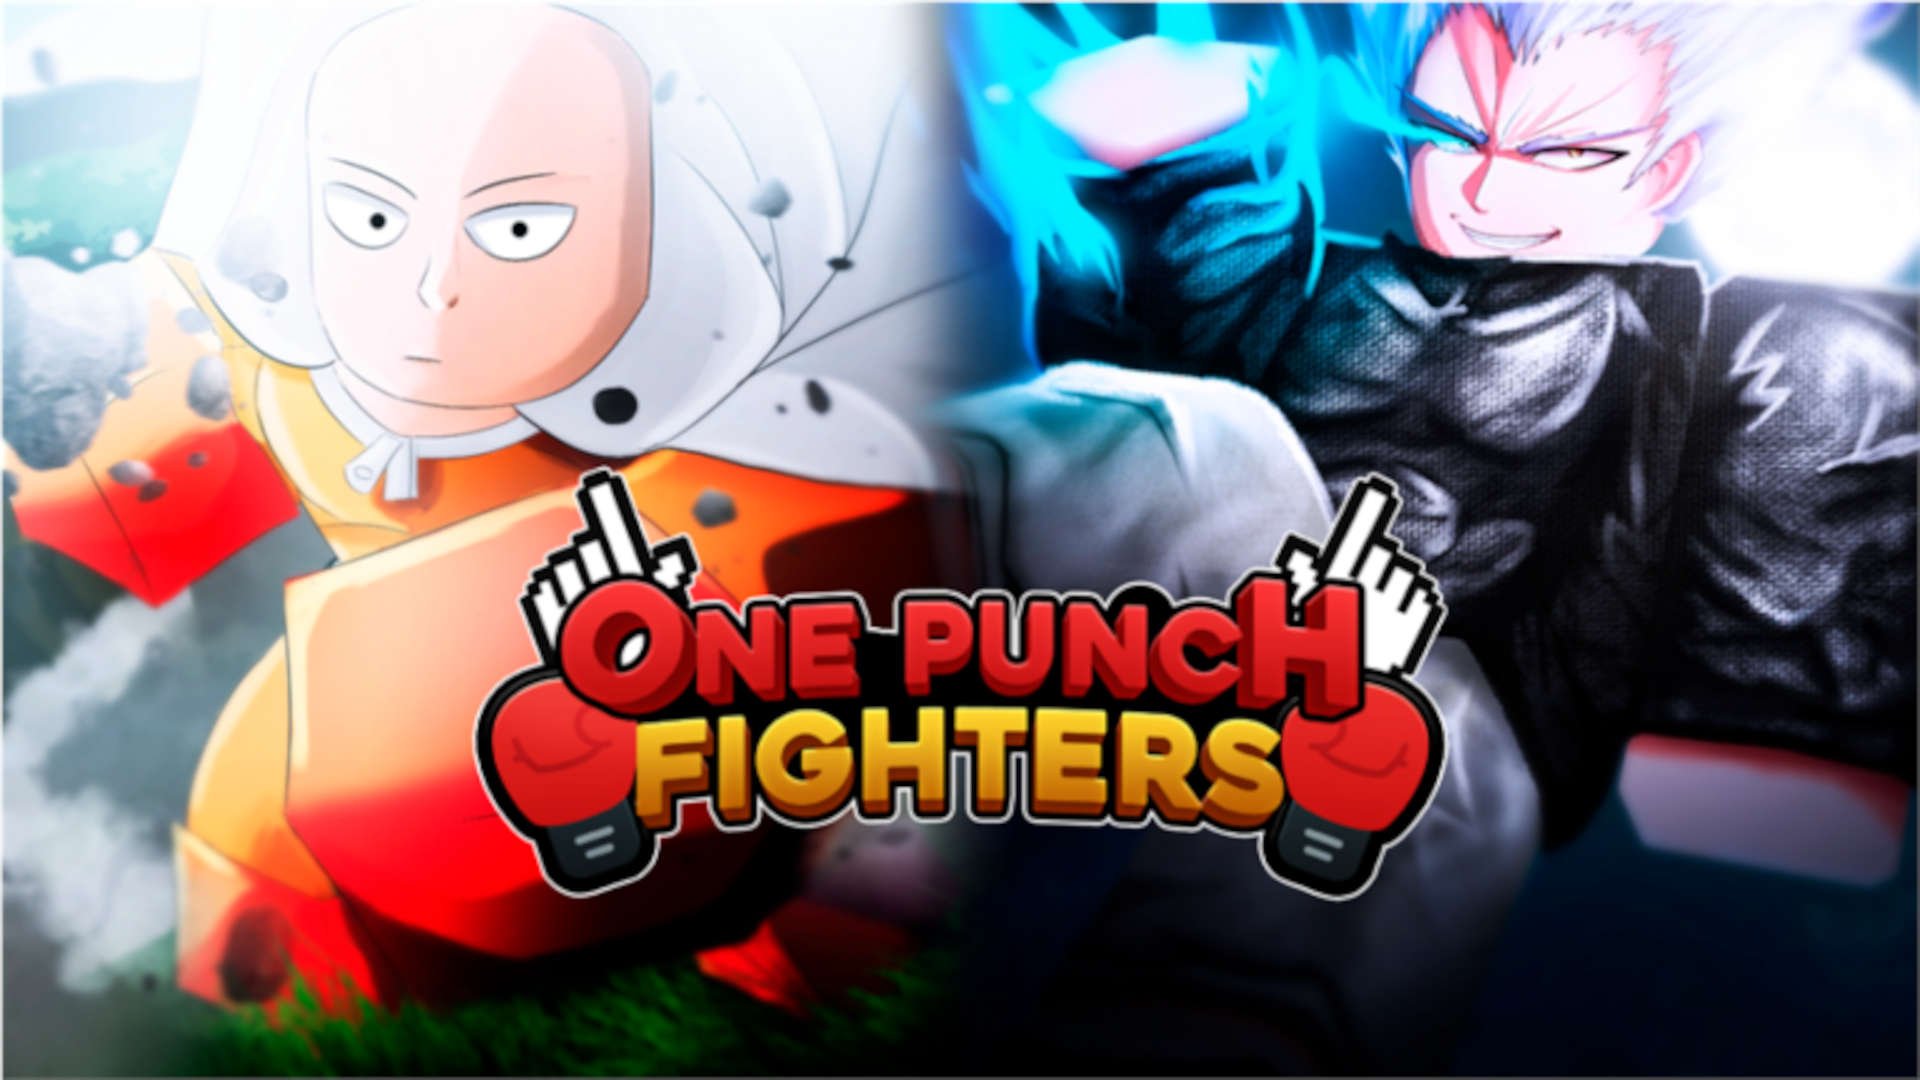 One Punch Fighters logo and characters